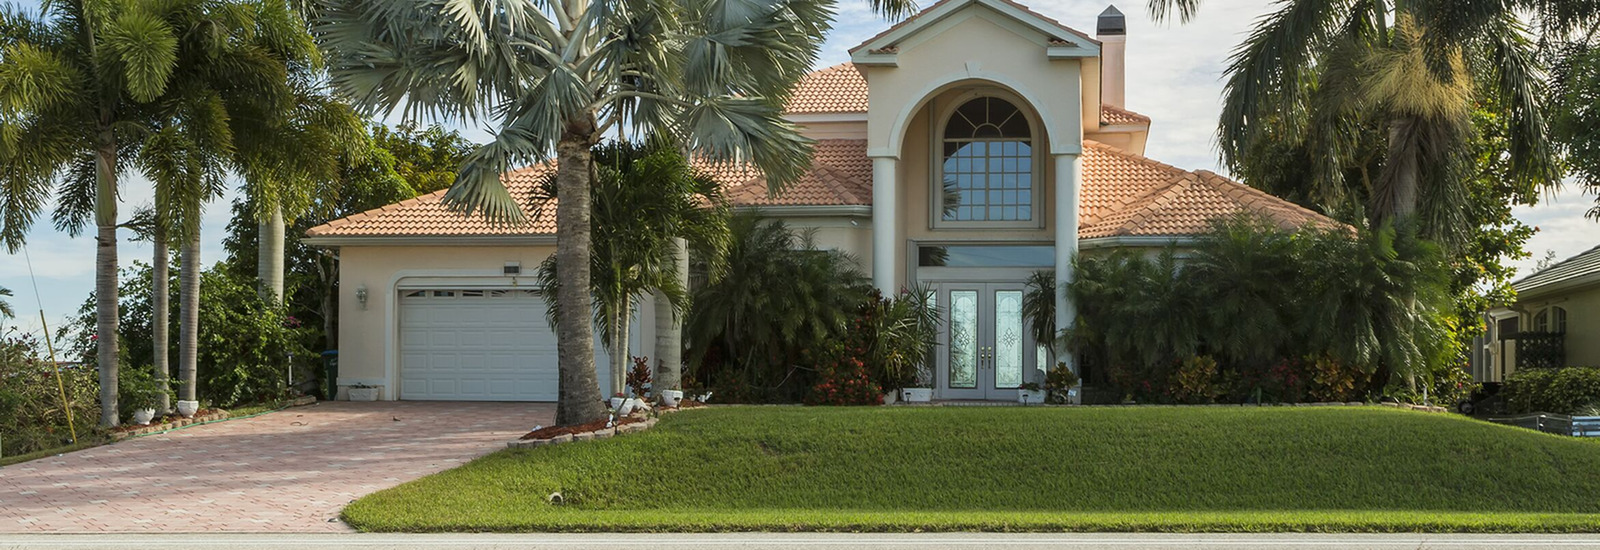 Photo of home for sale with palm trees in front of it